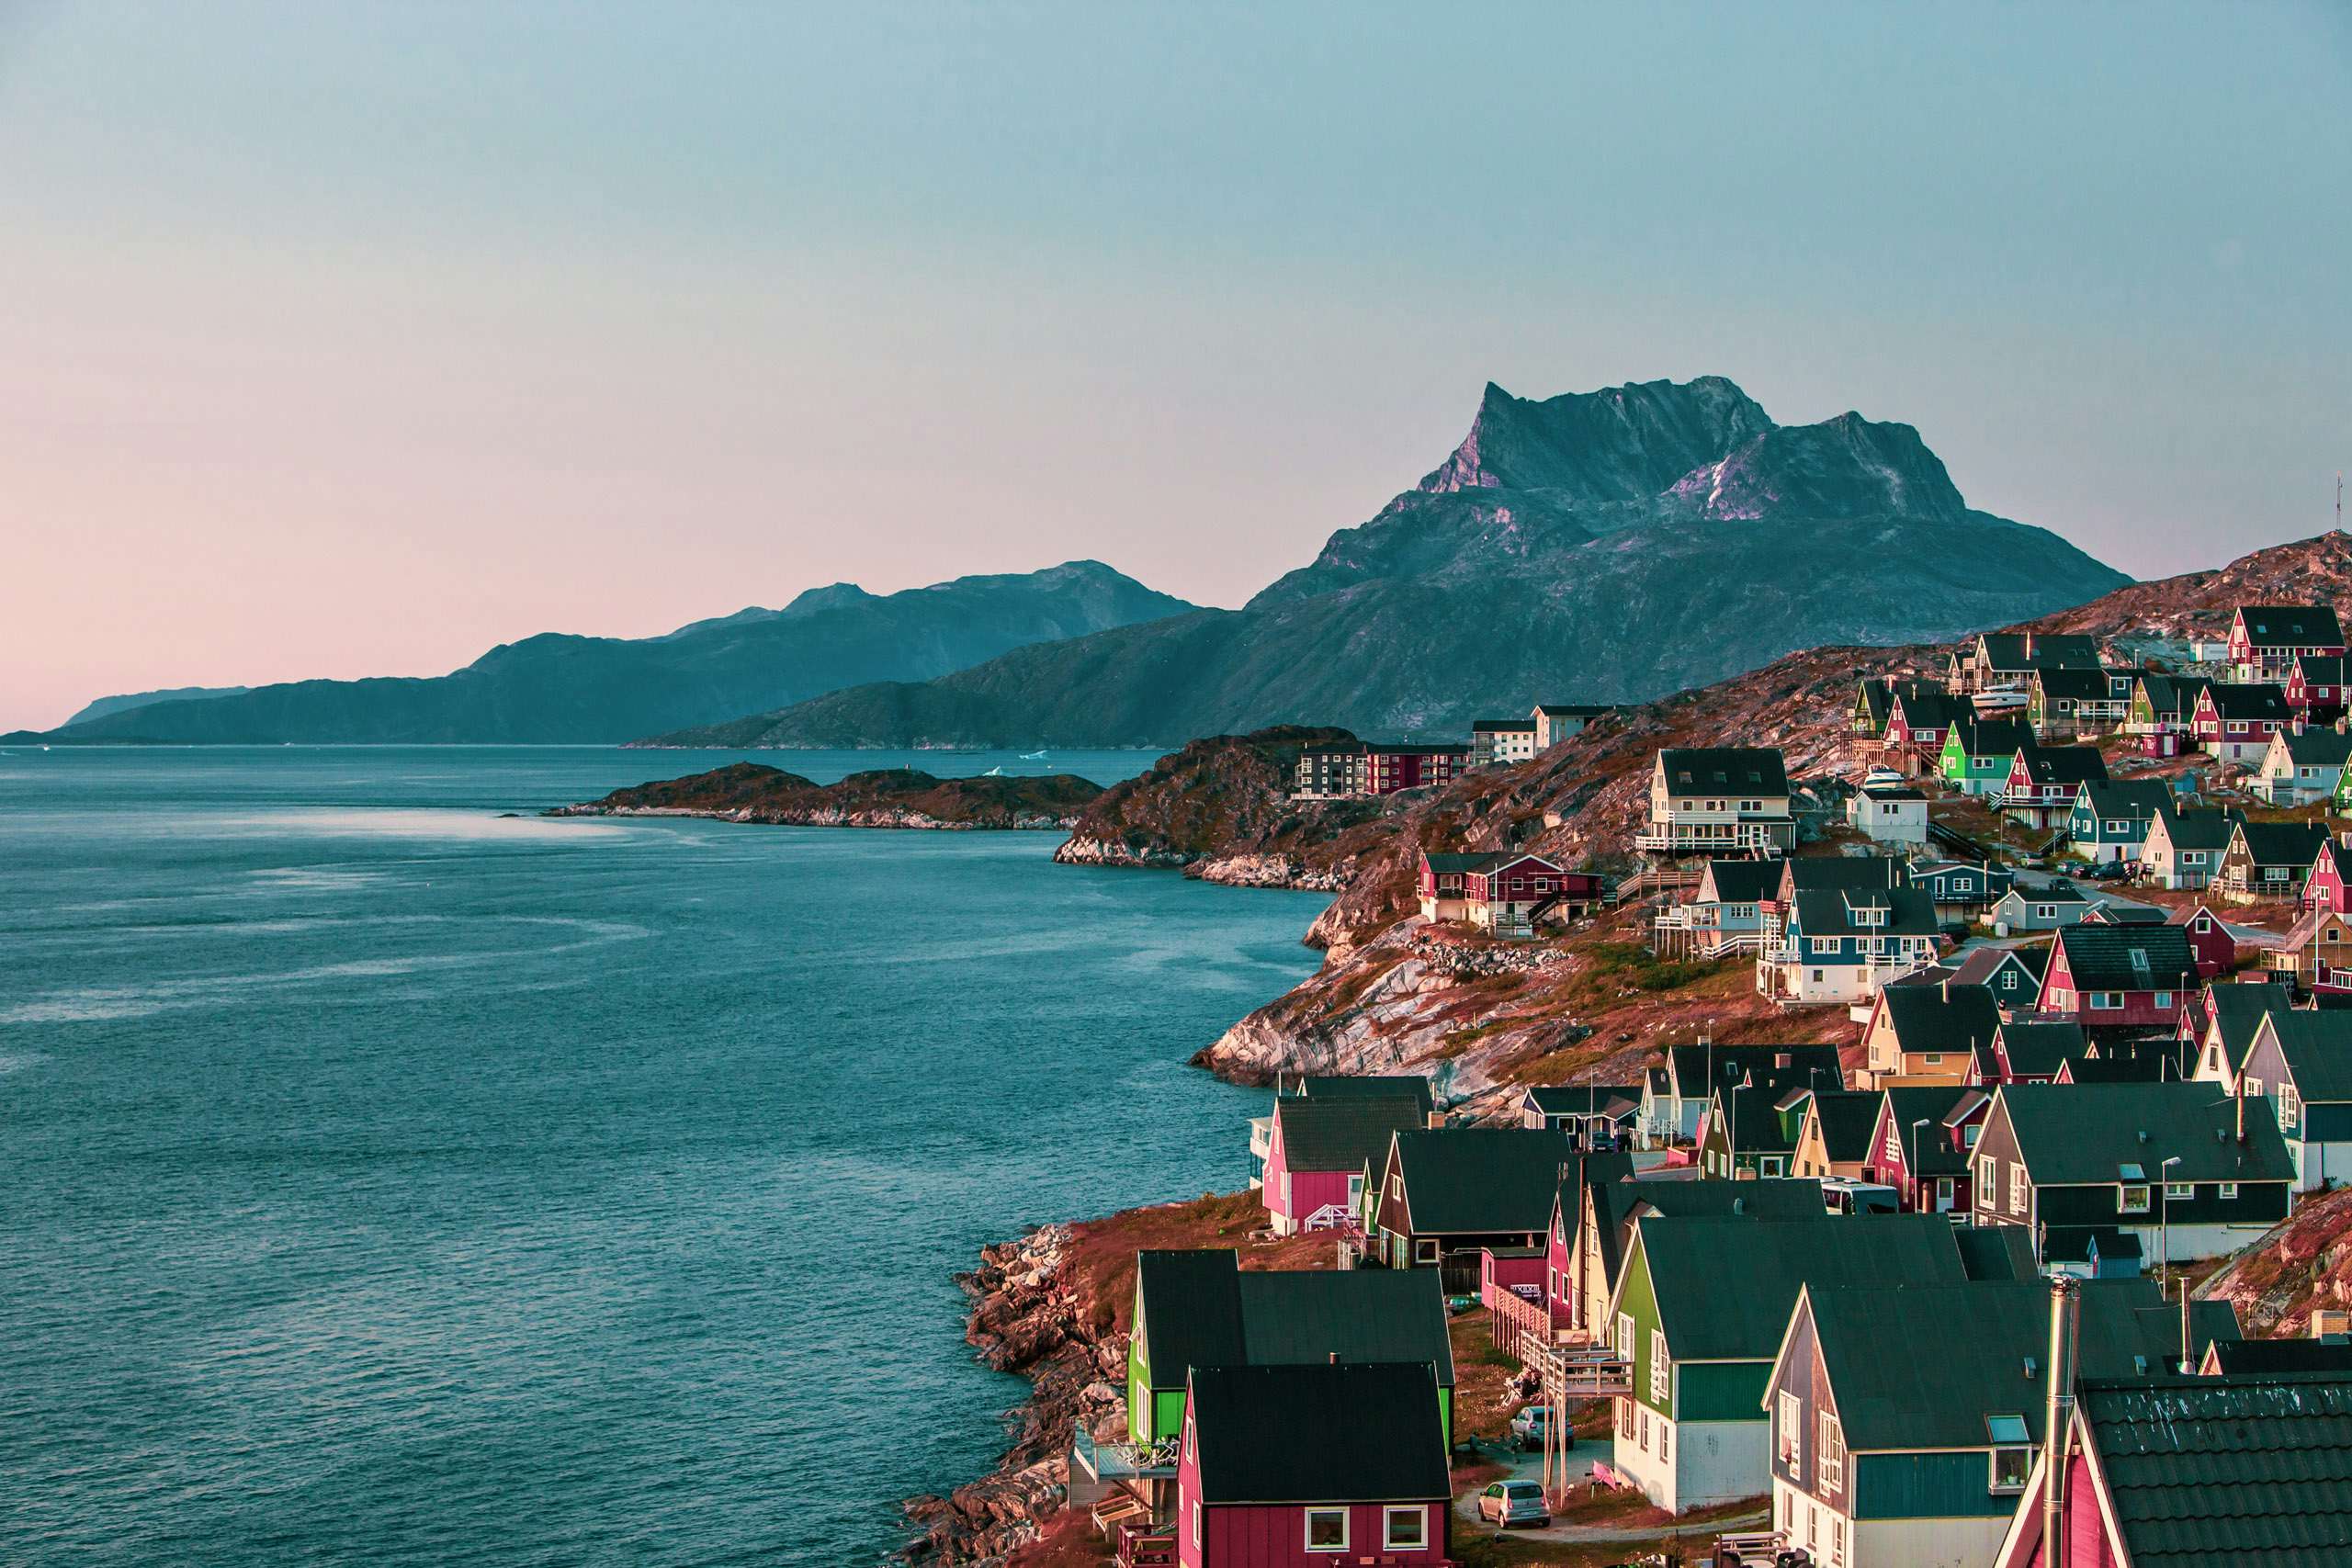 Twilight hues over a picturesque Greenlandic coastal village with colorful houses and a mountain backdrop.